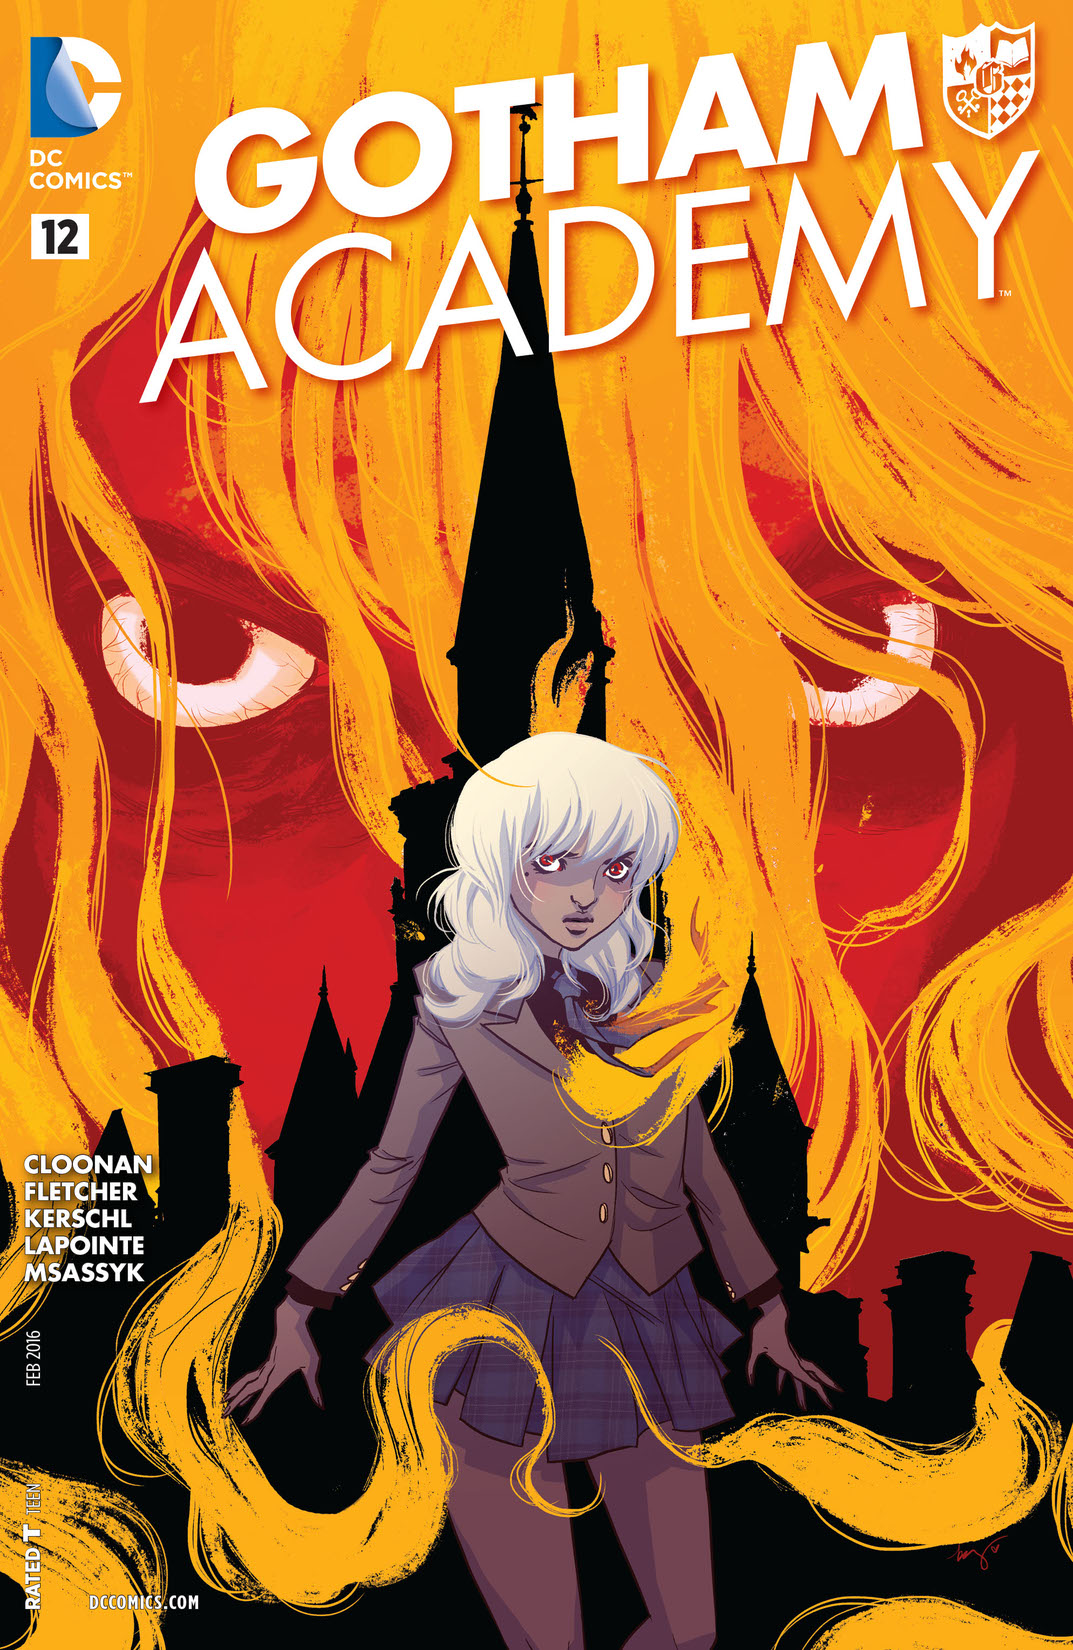 Gotham Academy #12 preview images